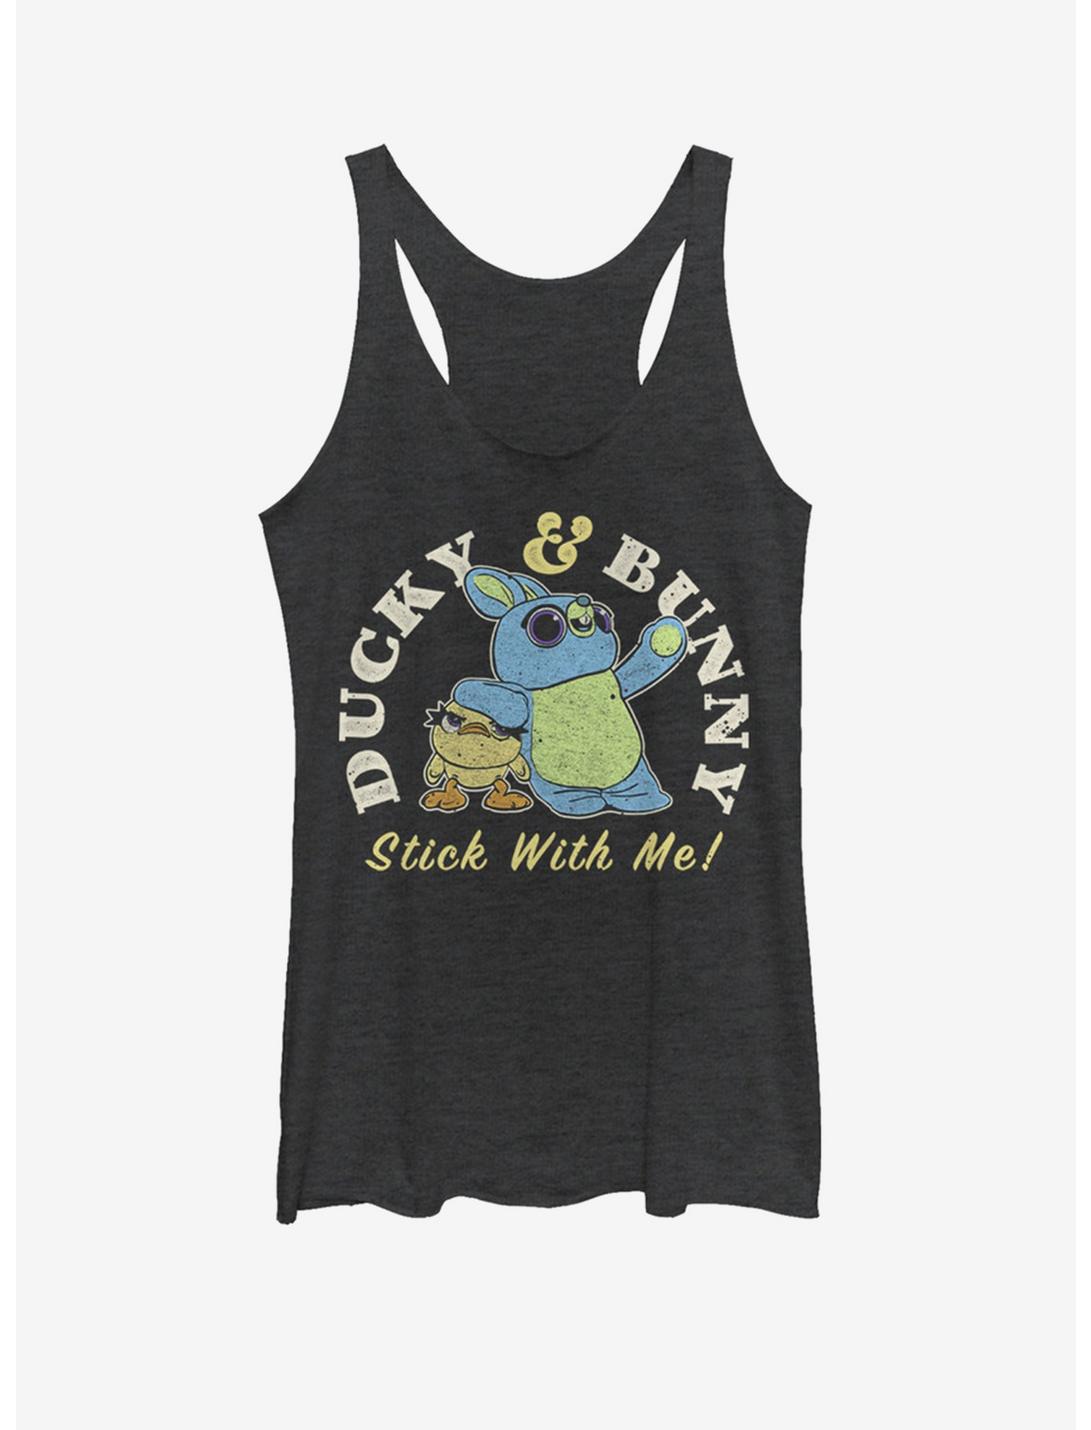 Disney Pixar Toy Story 4 Ducky And Bunny Brand Girls Black Heathered Tank Top, BLK HTR, hi-res